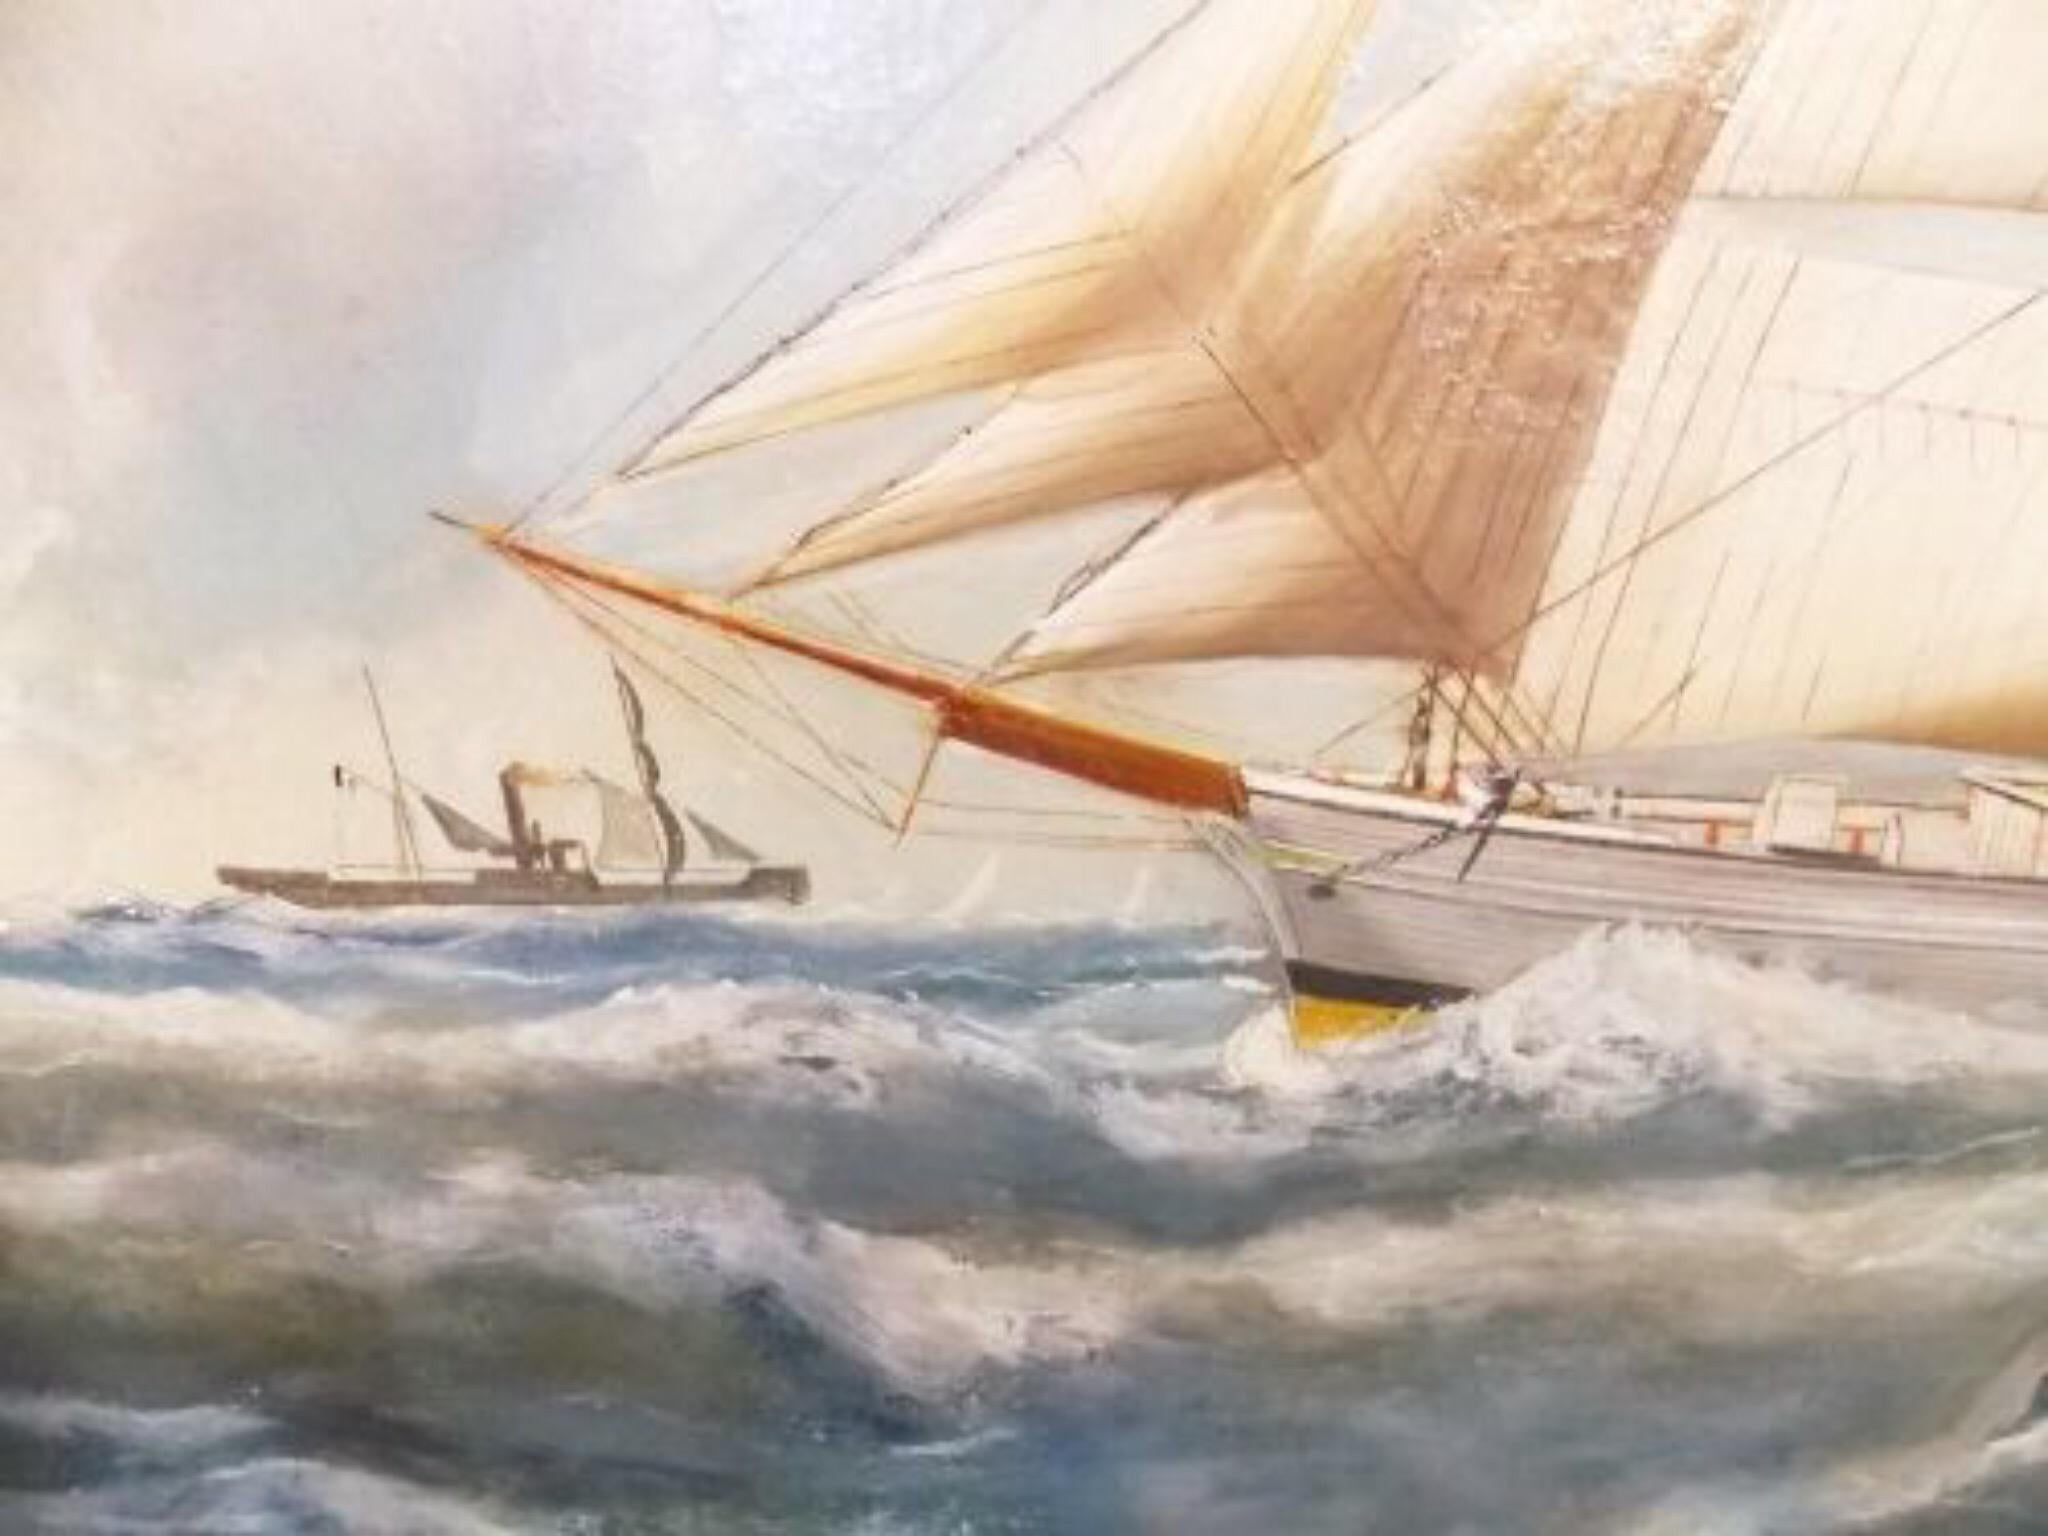 Description
Large Late 19th Century Oil Painting on Canvas of The Three Masted Vessel named PRONTO. 
-
This historically important painting is the only known surviving example painted shortly after the vessels construction in 1892 and sometime